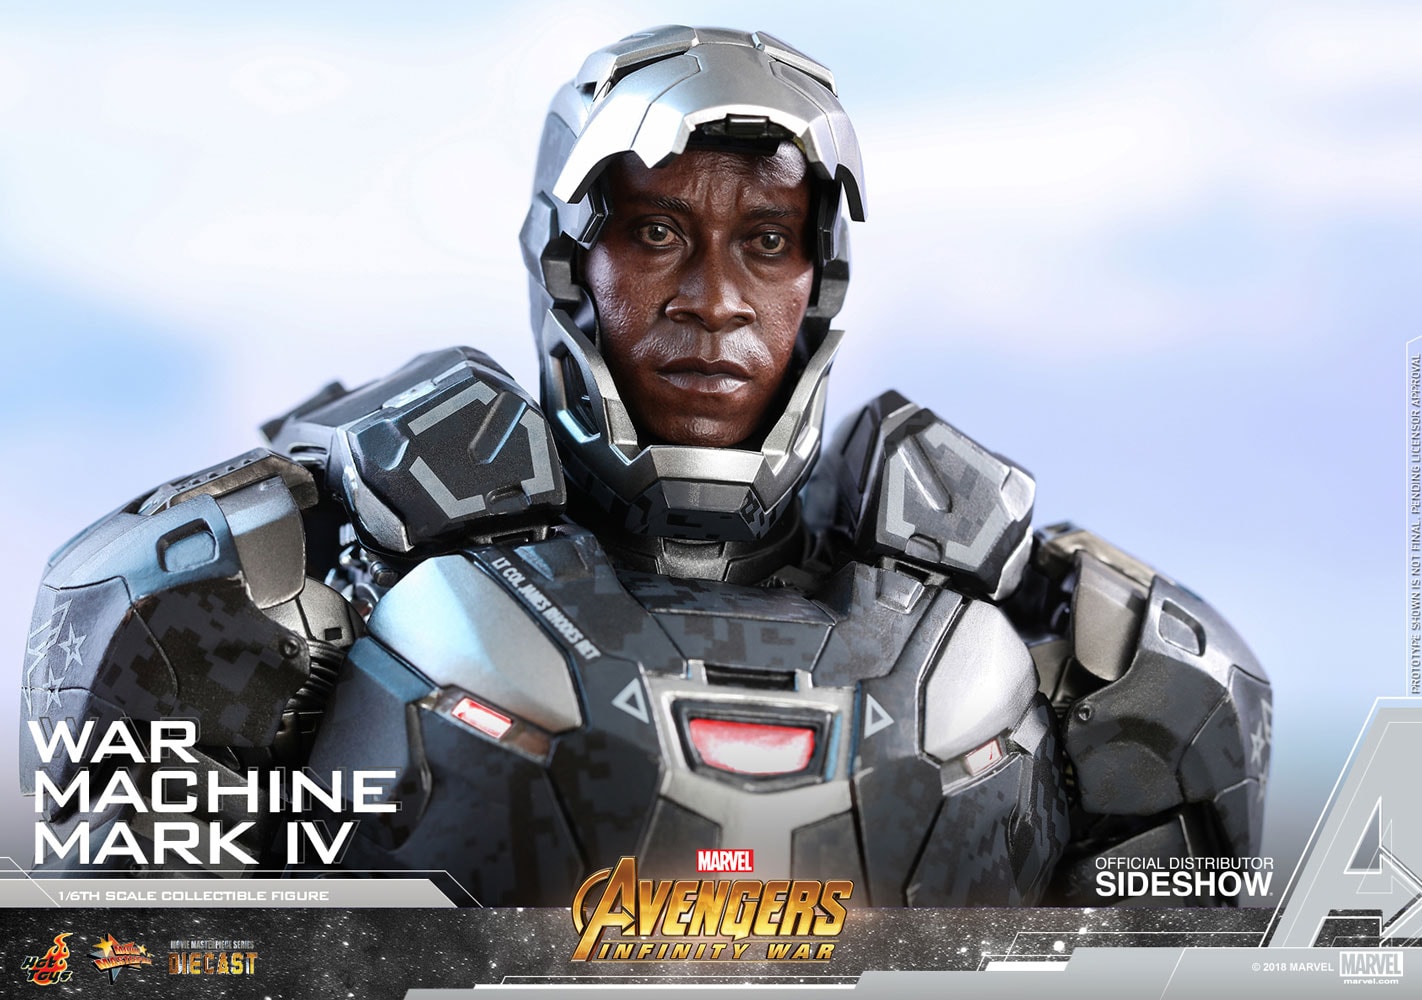 Hot Toys Avengers Infinity War War Machine Mark IV Figure Special Edition 1/6th scale collectible Marvel Studios